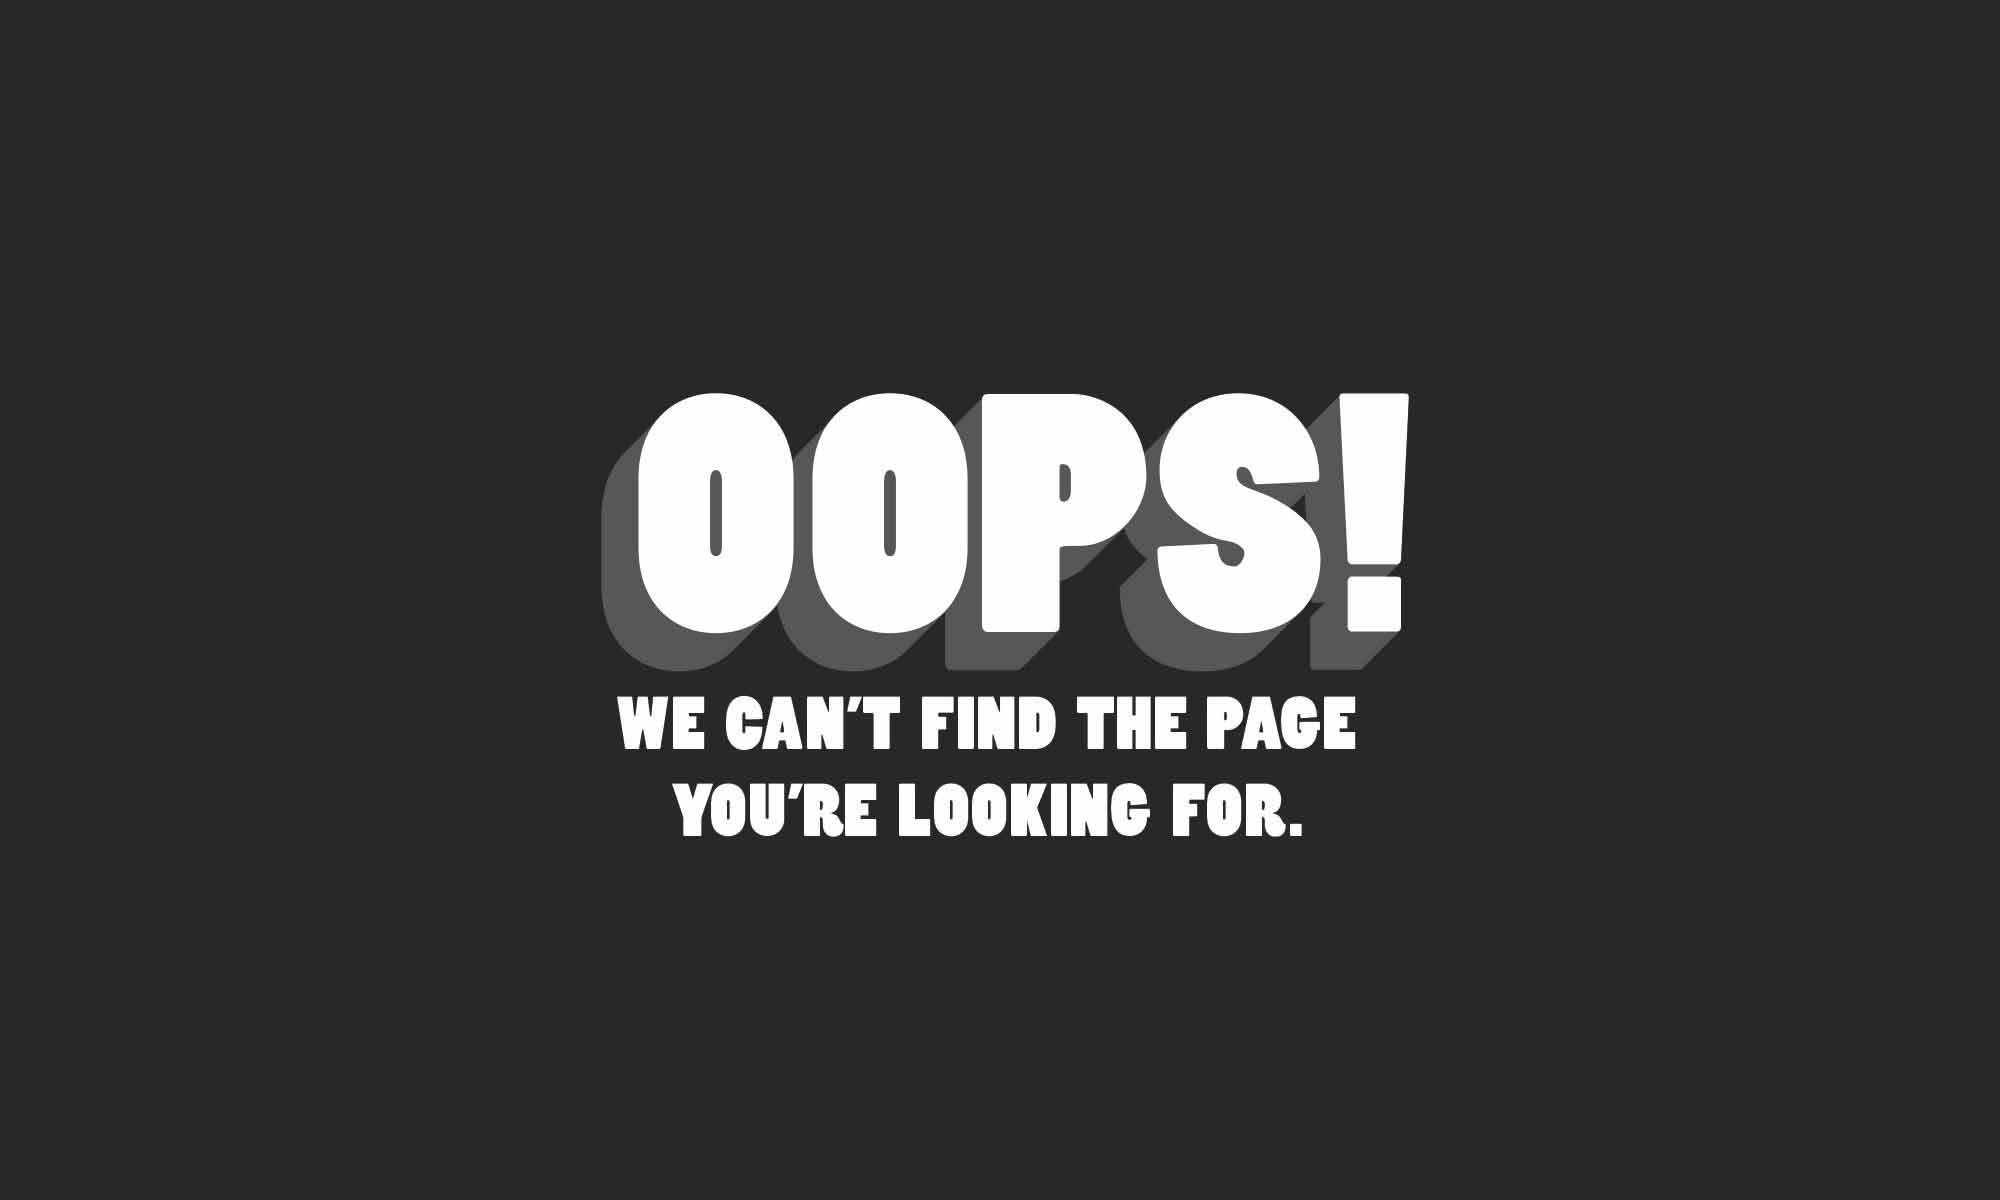 Oops! We can't find the page you're looking for